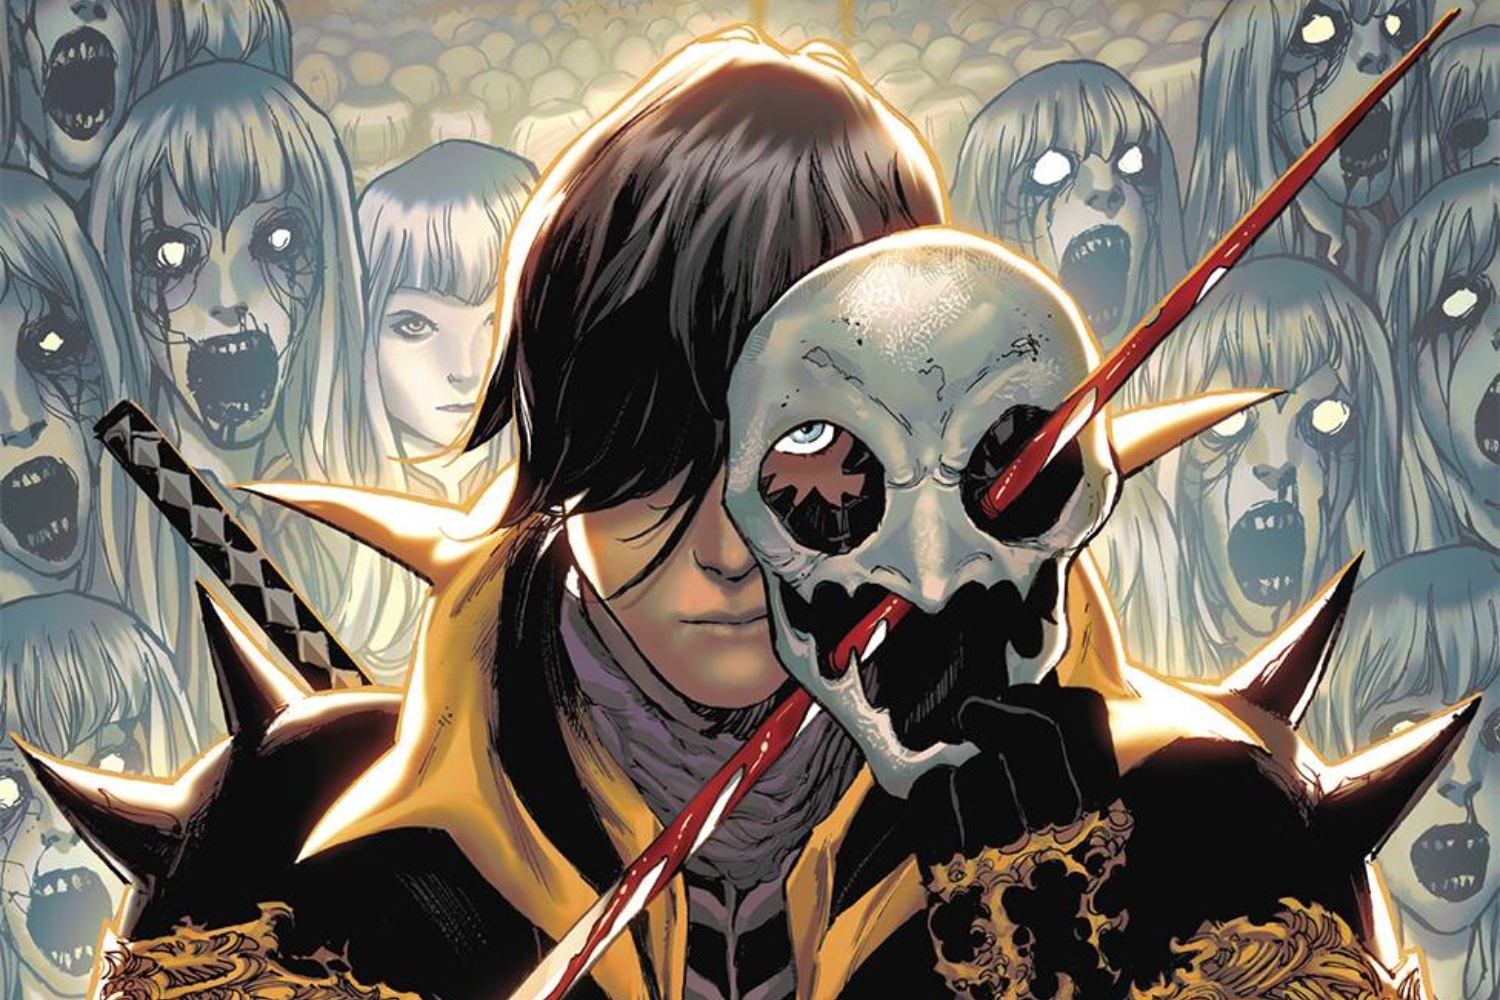 'Edenwood' #2 extends the lore with truly visceral impact